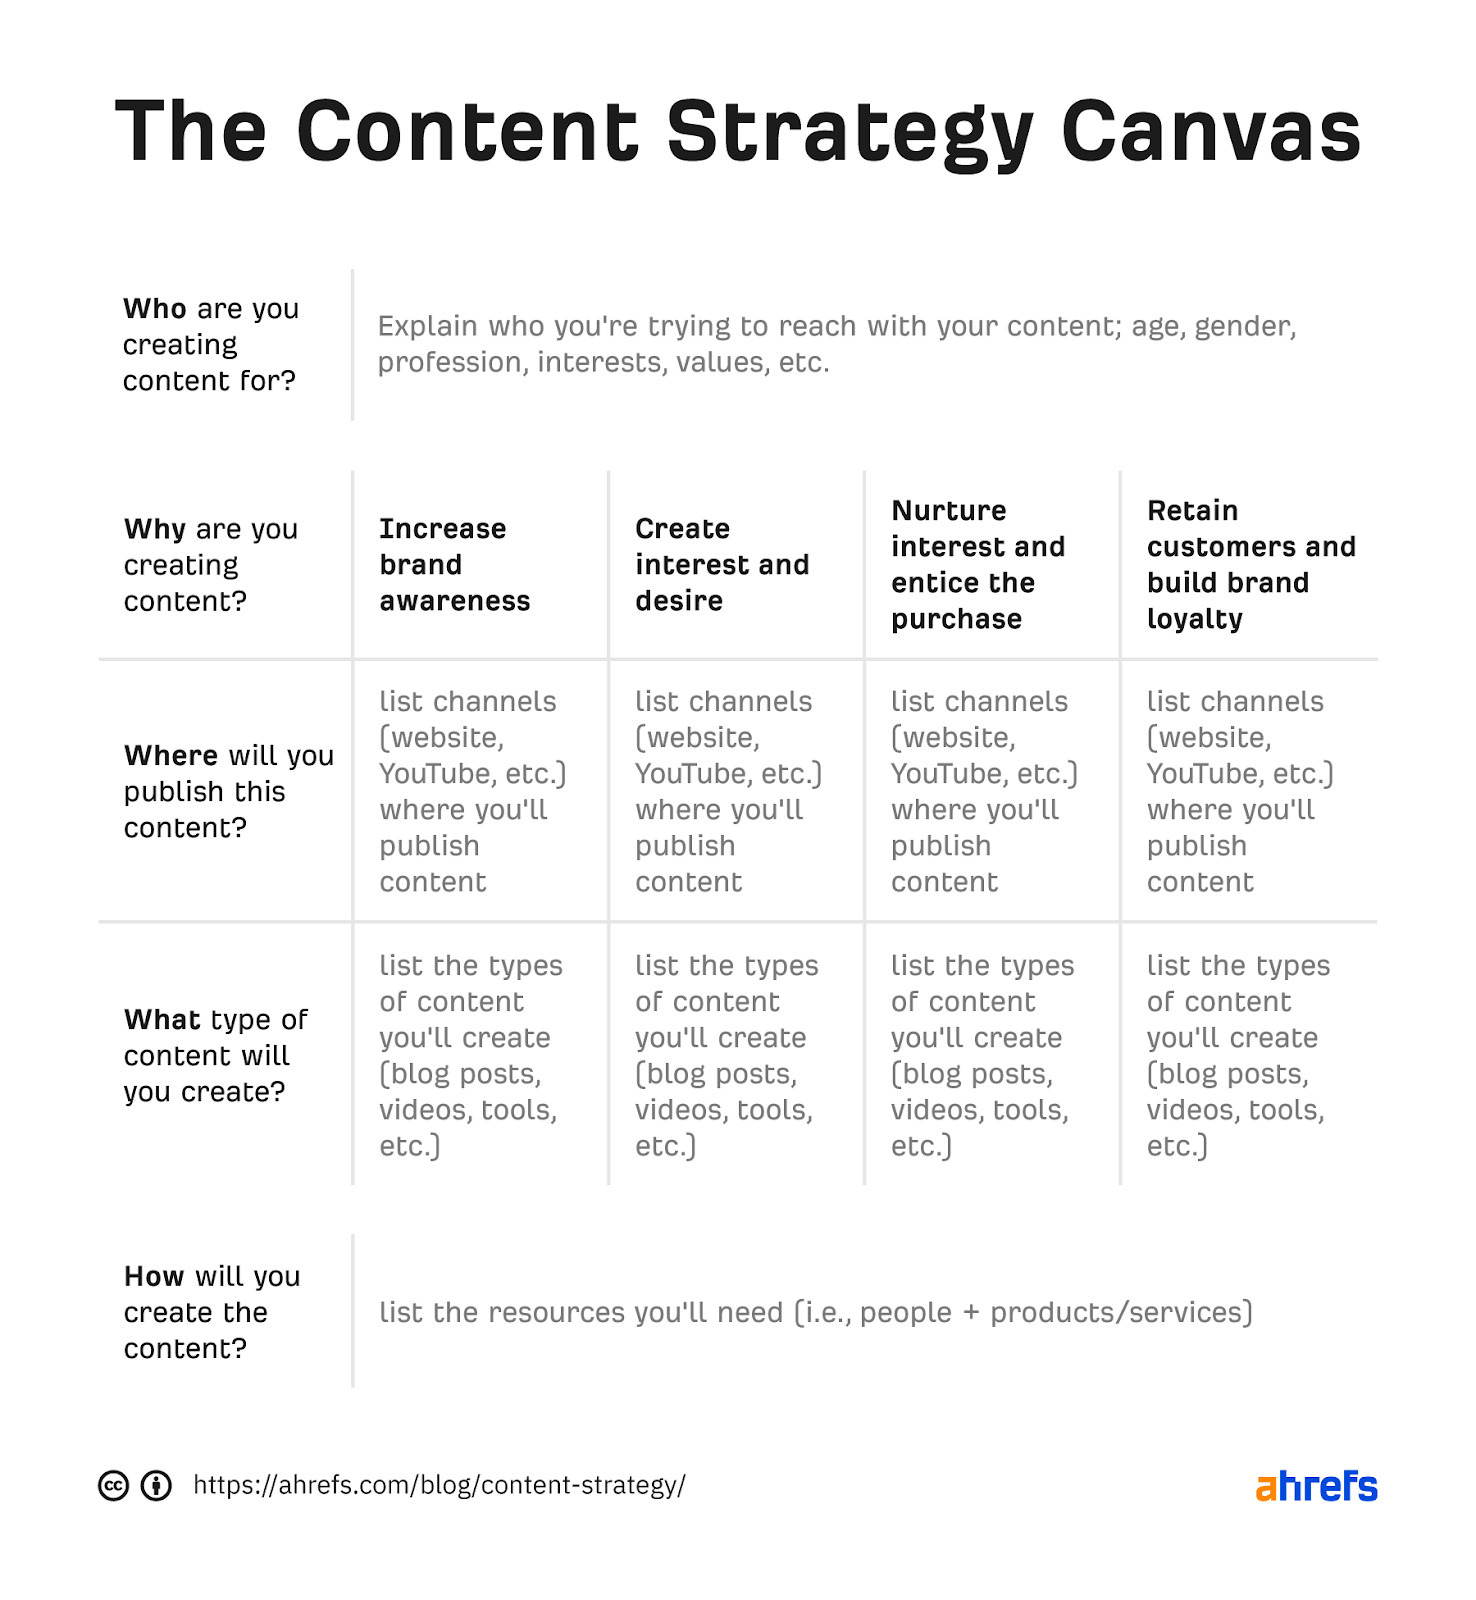 A "content strategy canvas" table where the five questions are answered in detail